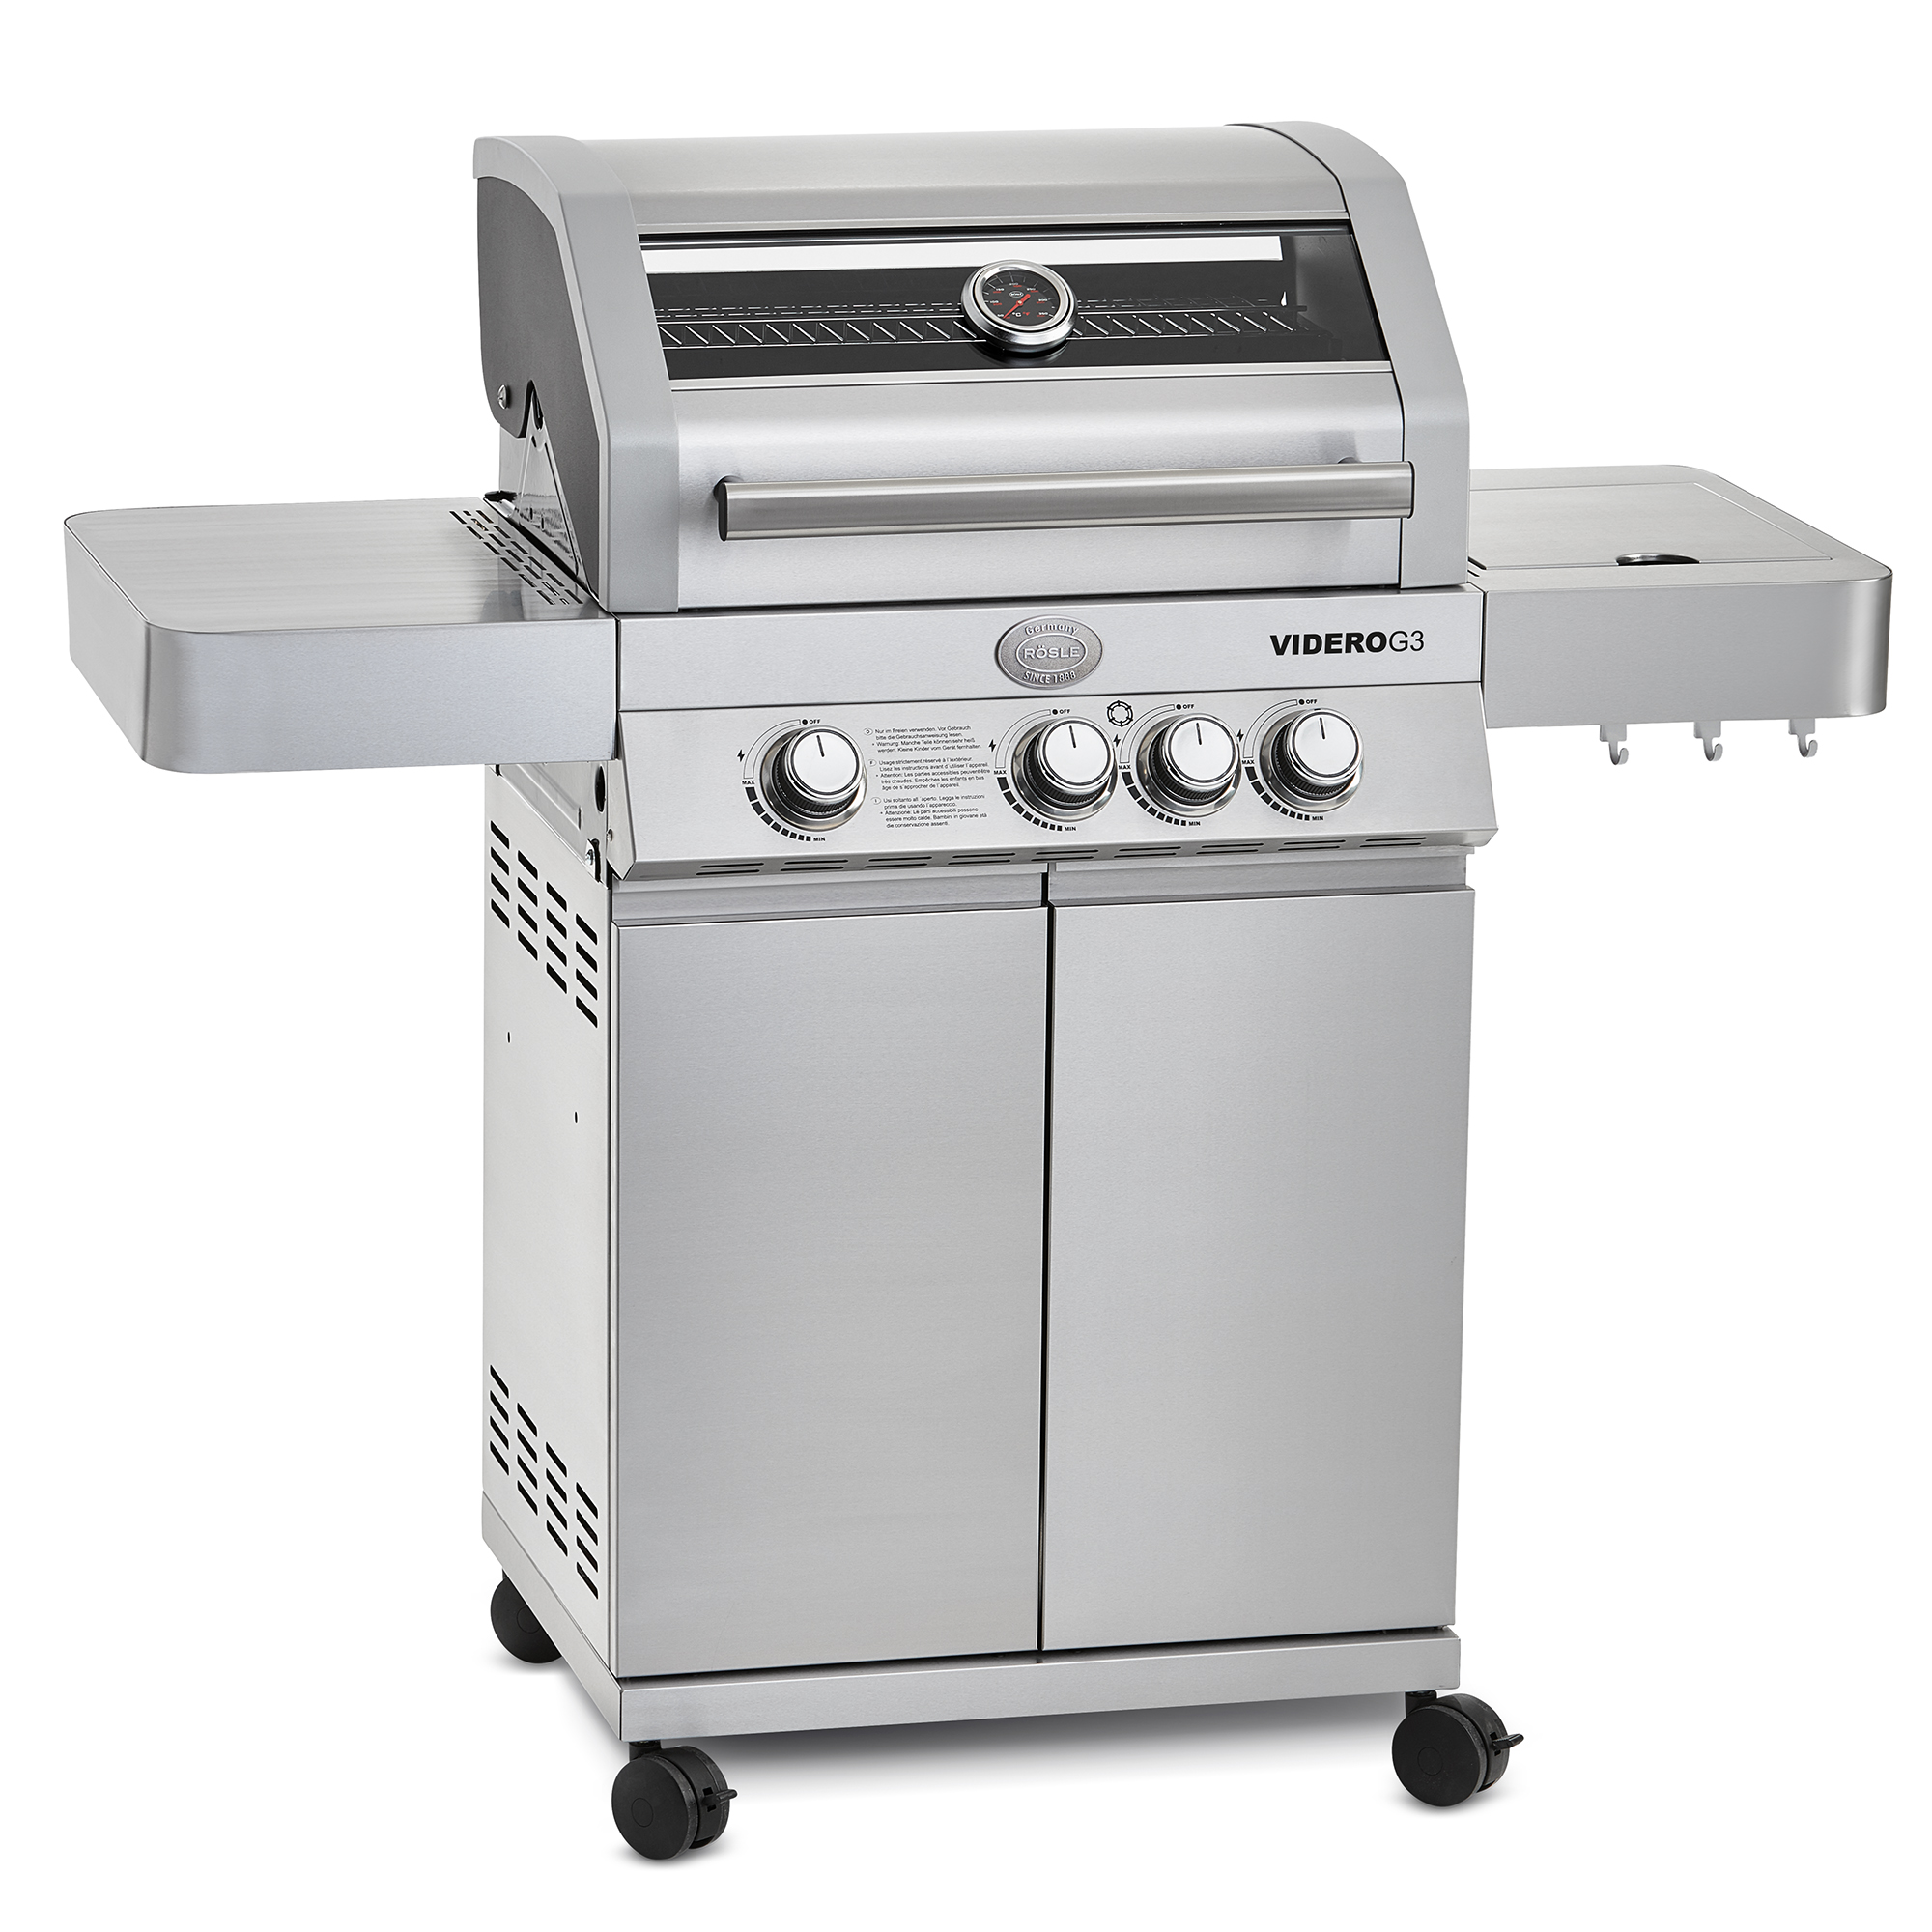 Gas grill BBQ station VIDEROG3 stainless steel 50 mbar